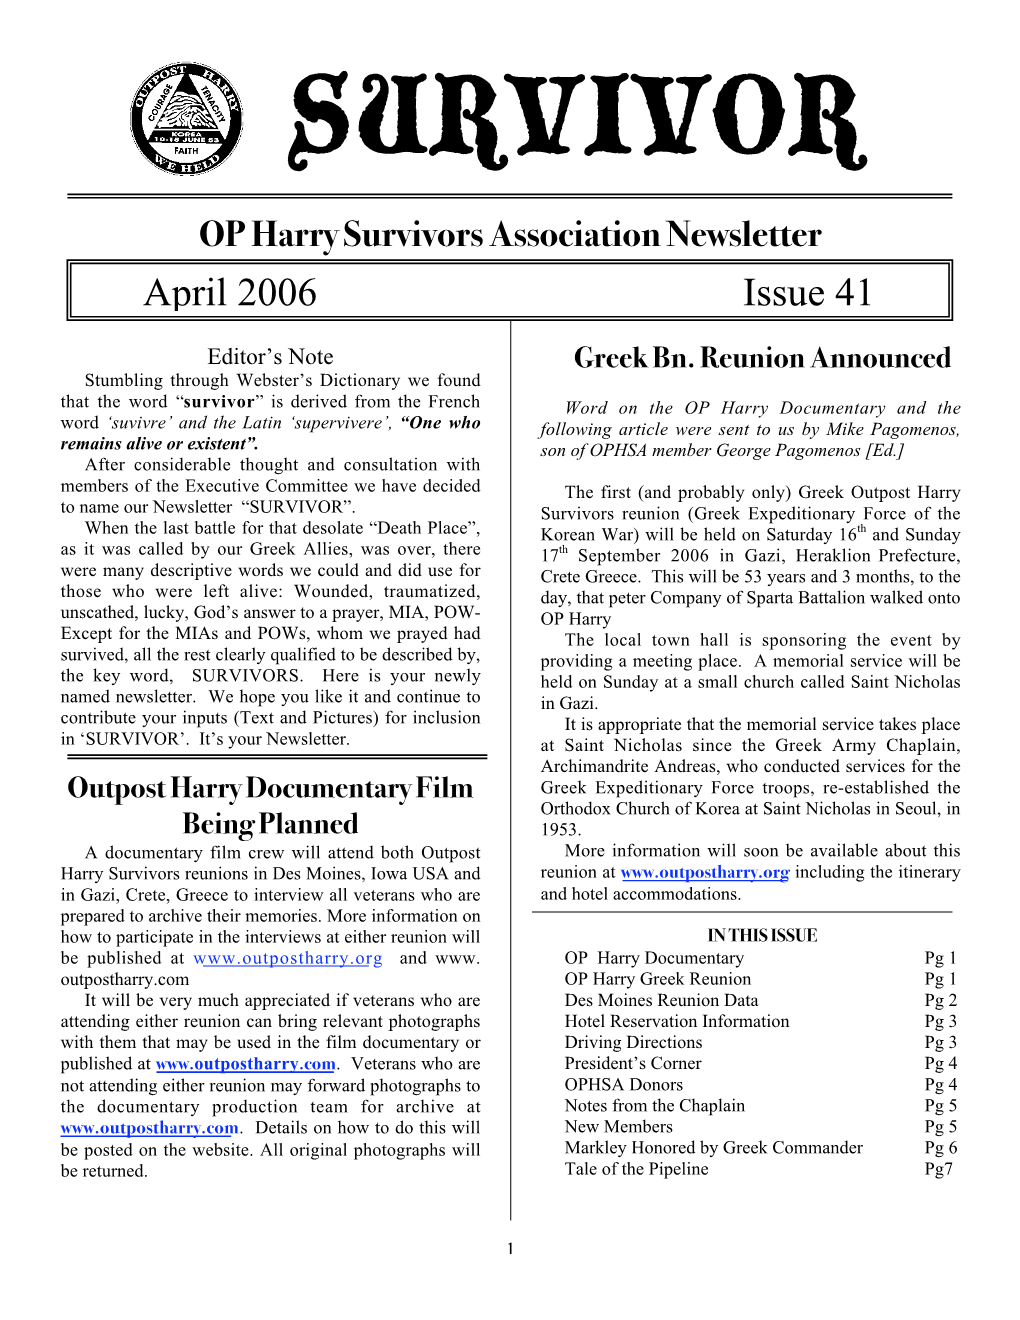 April 2006 Issue 41